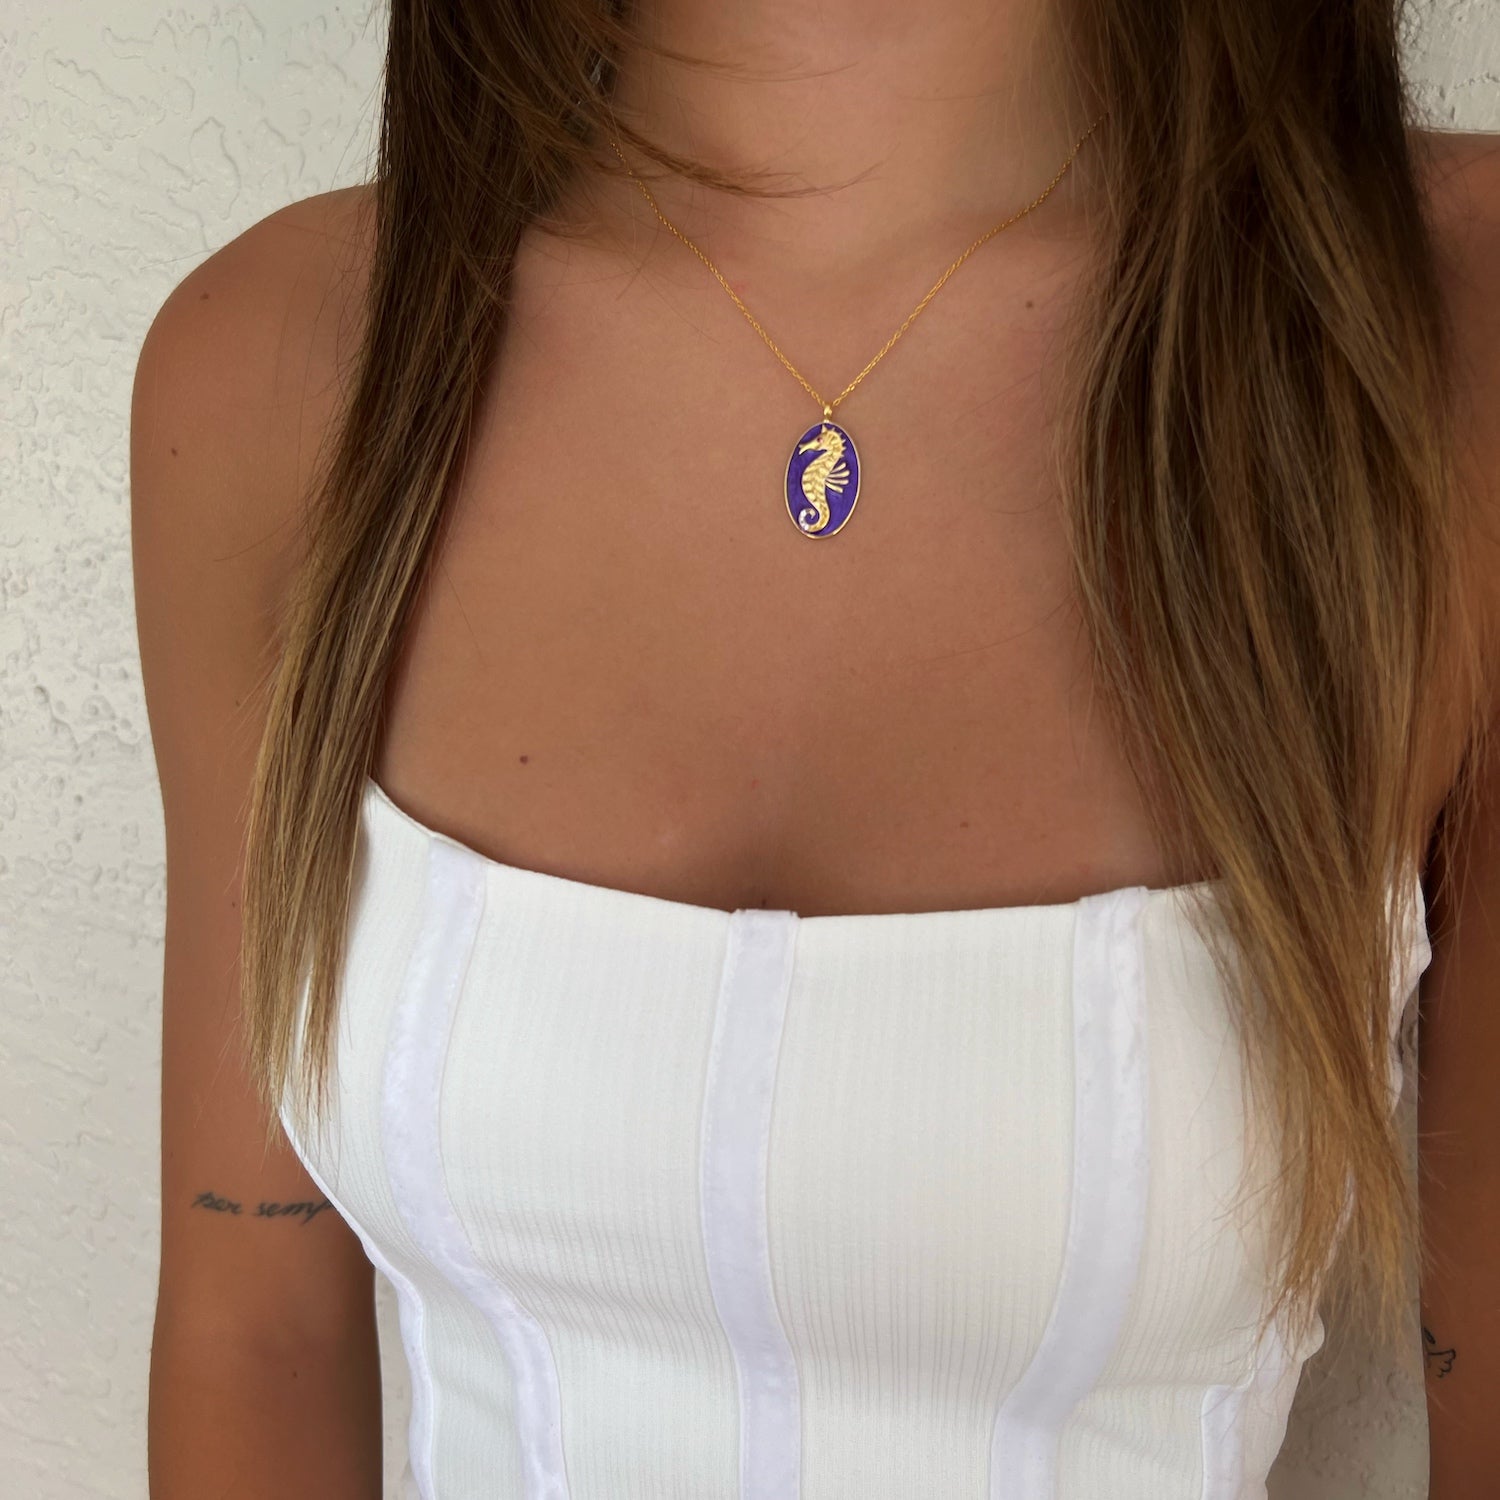 The Spirit Animal Blue Seahorse Necklace elegantly adorning the neck of a model, accentuating their grace and inner strength.